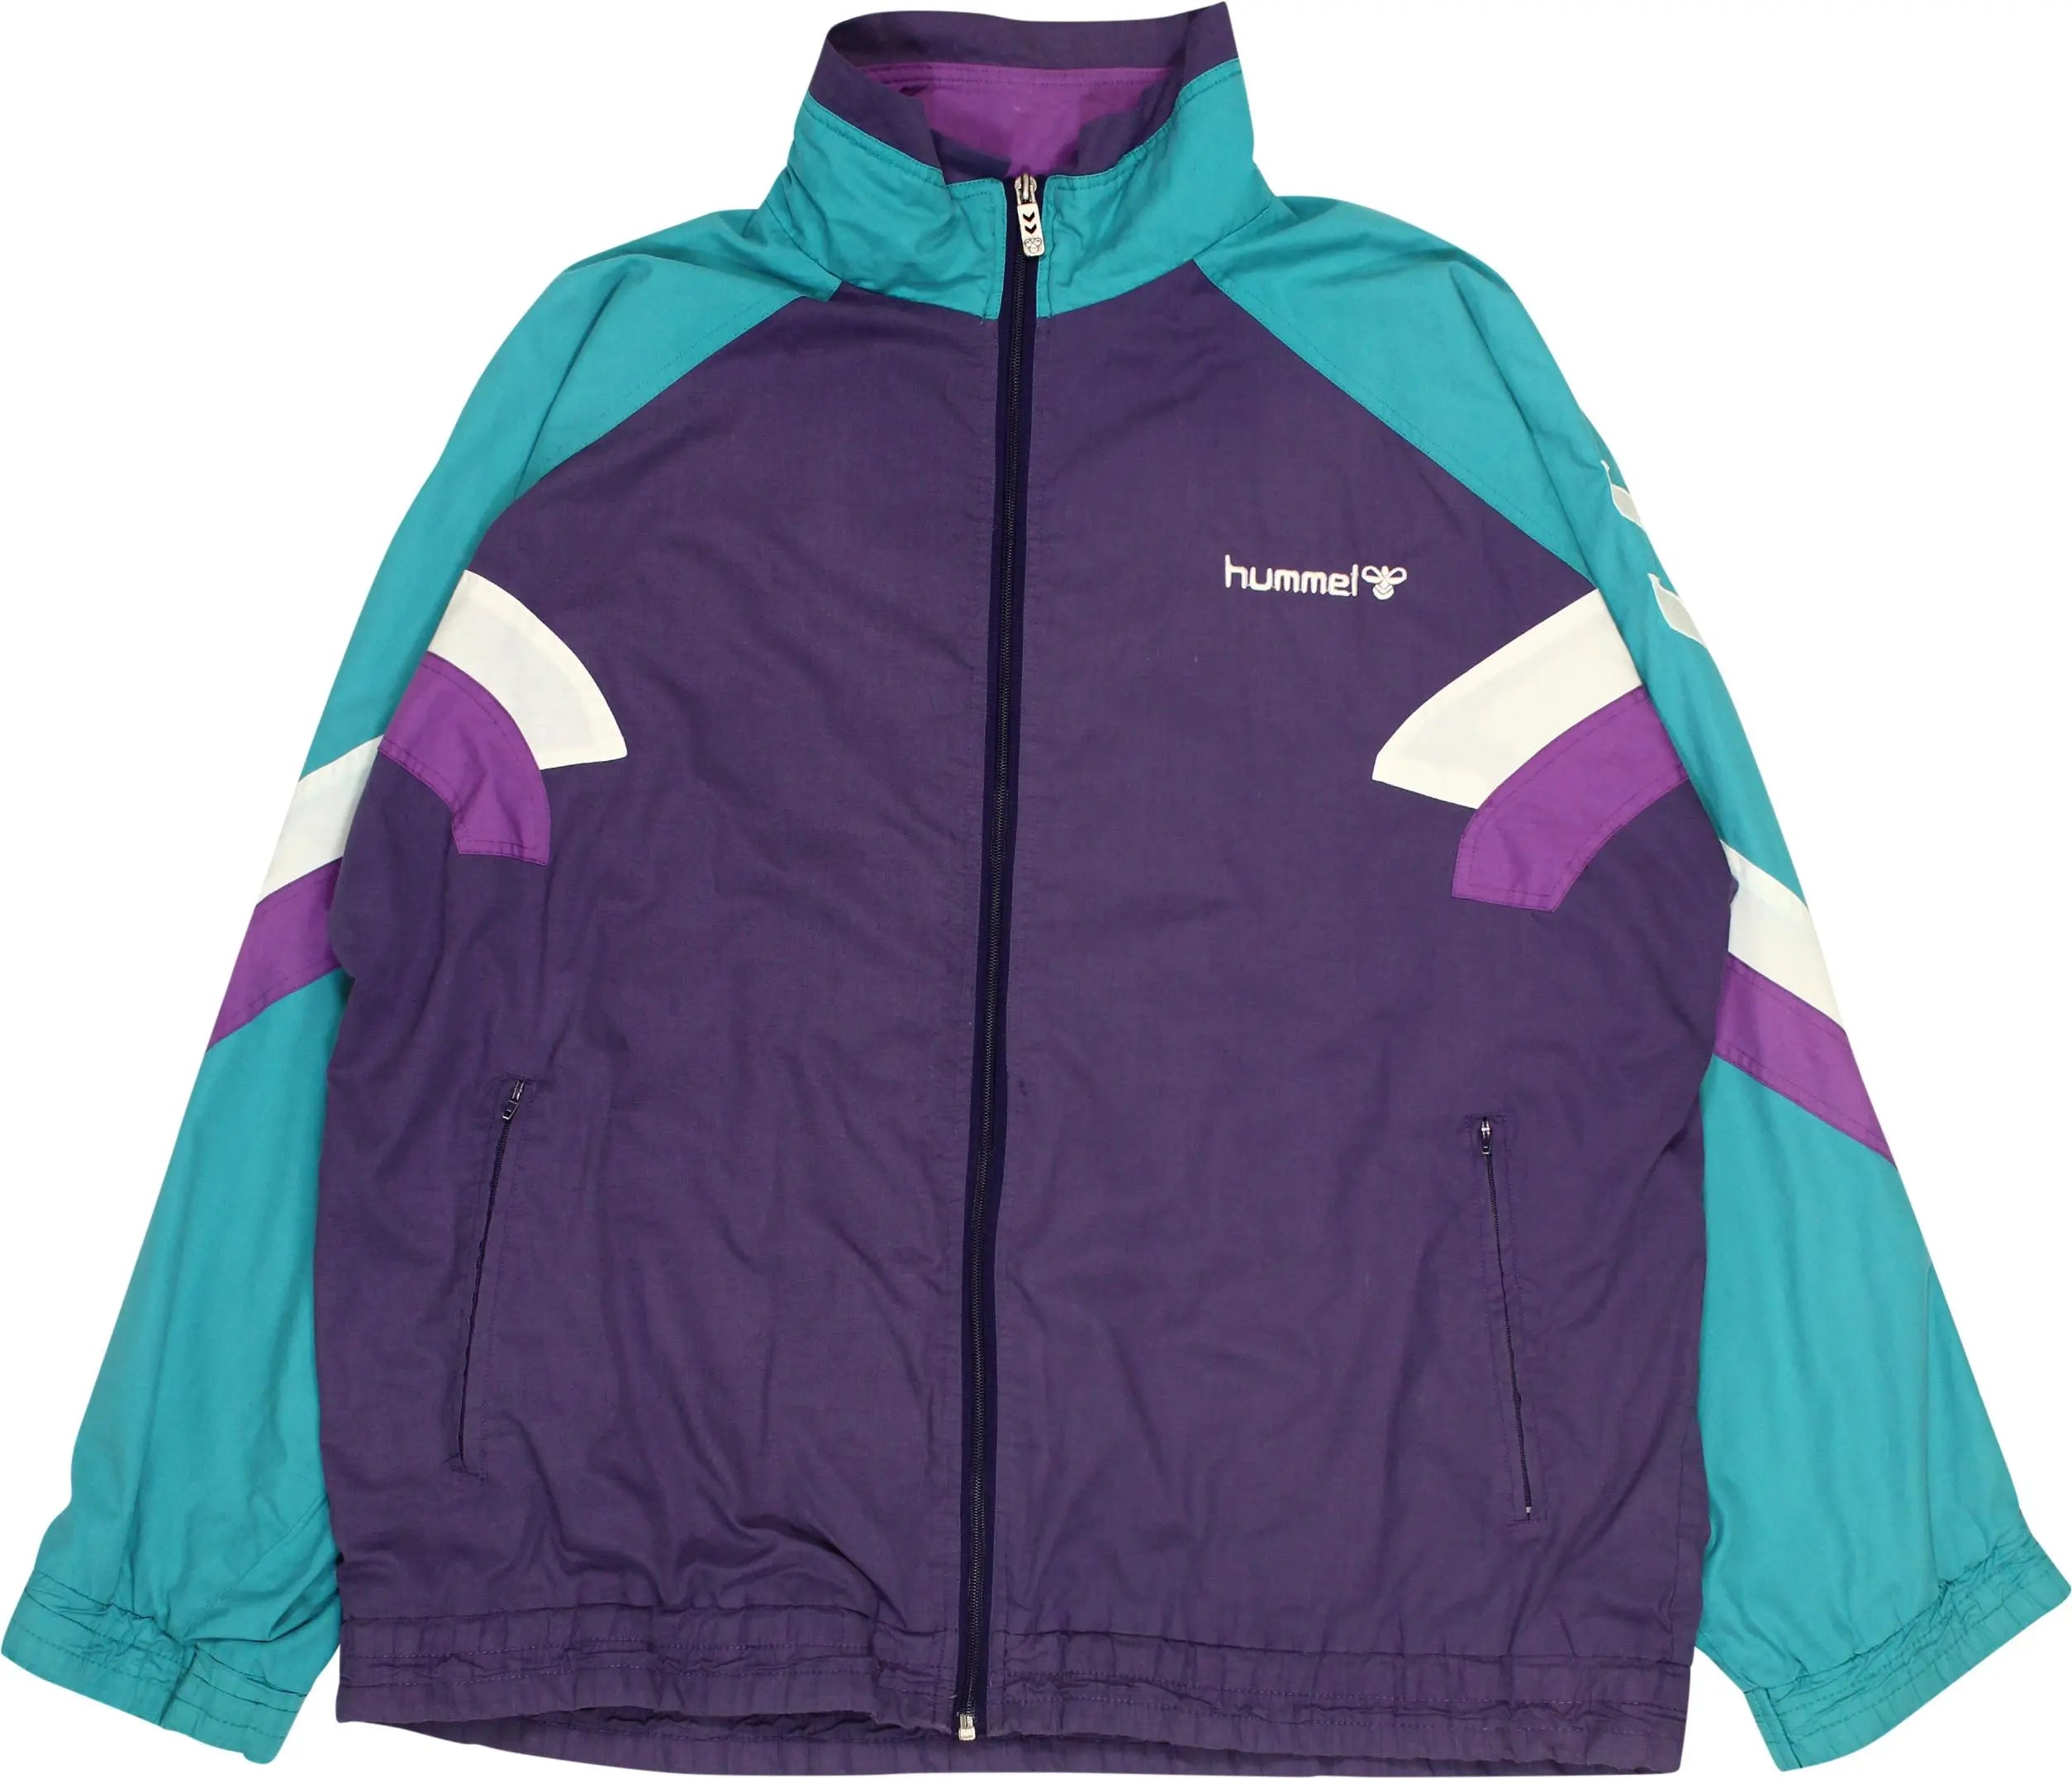 Hummel - 90s Windbreaker by Hummel- ThriftTale.com - Vintage and second handclothing